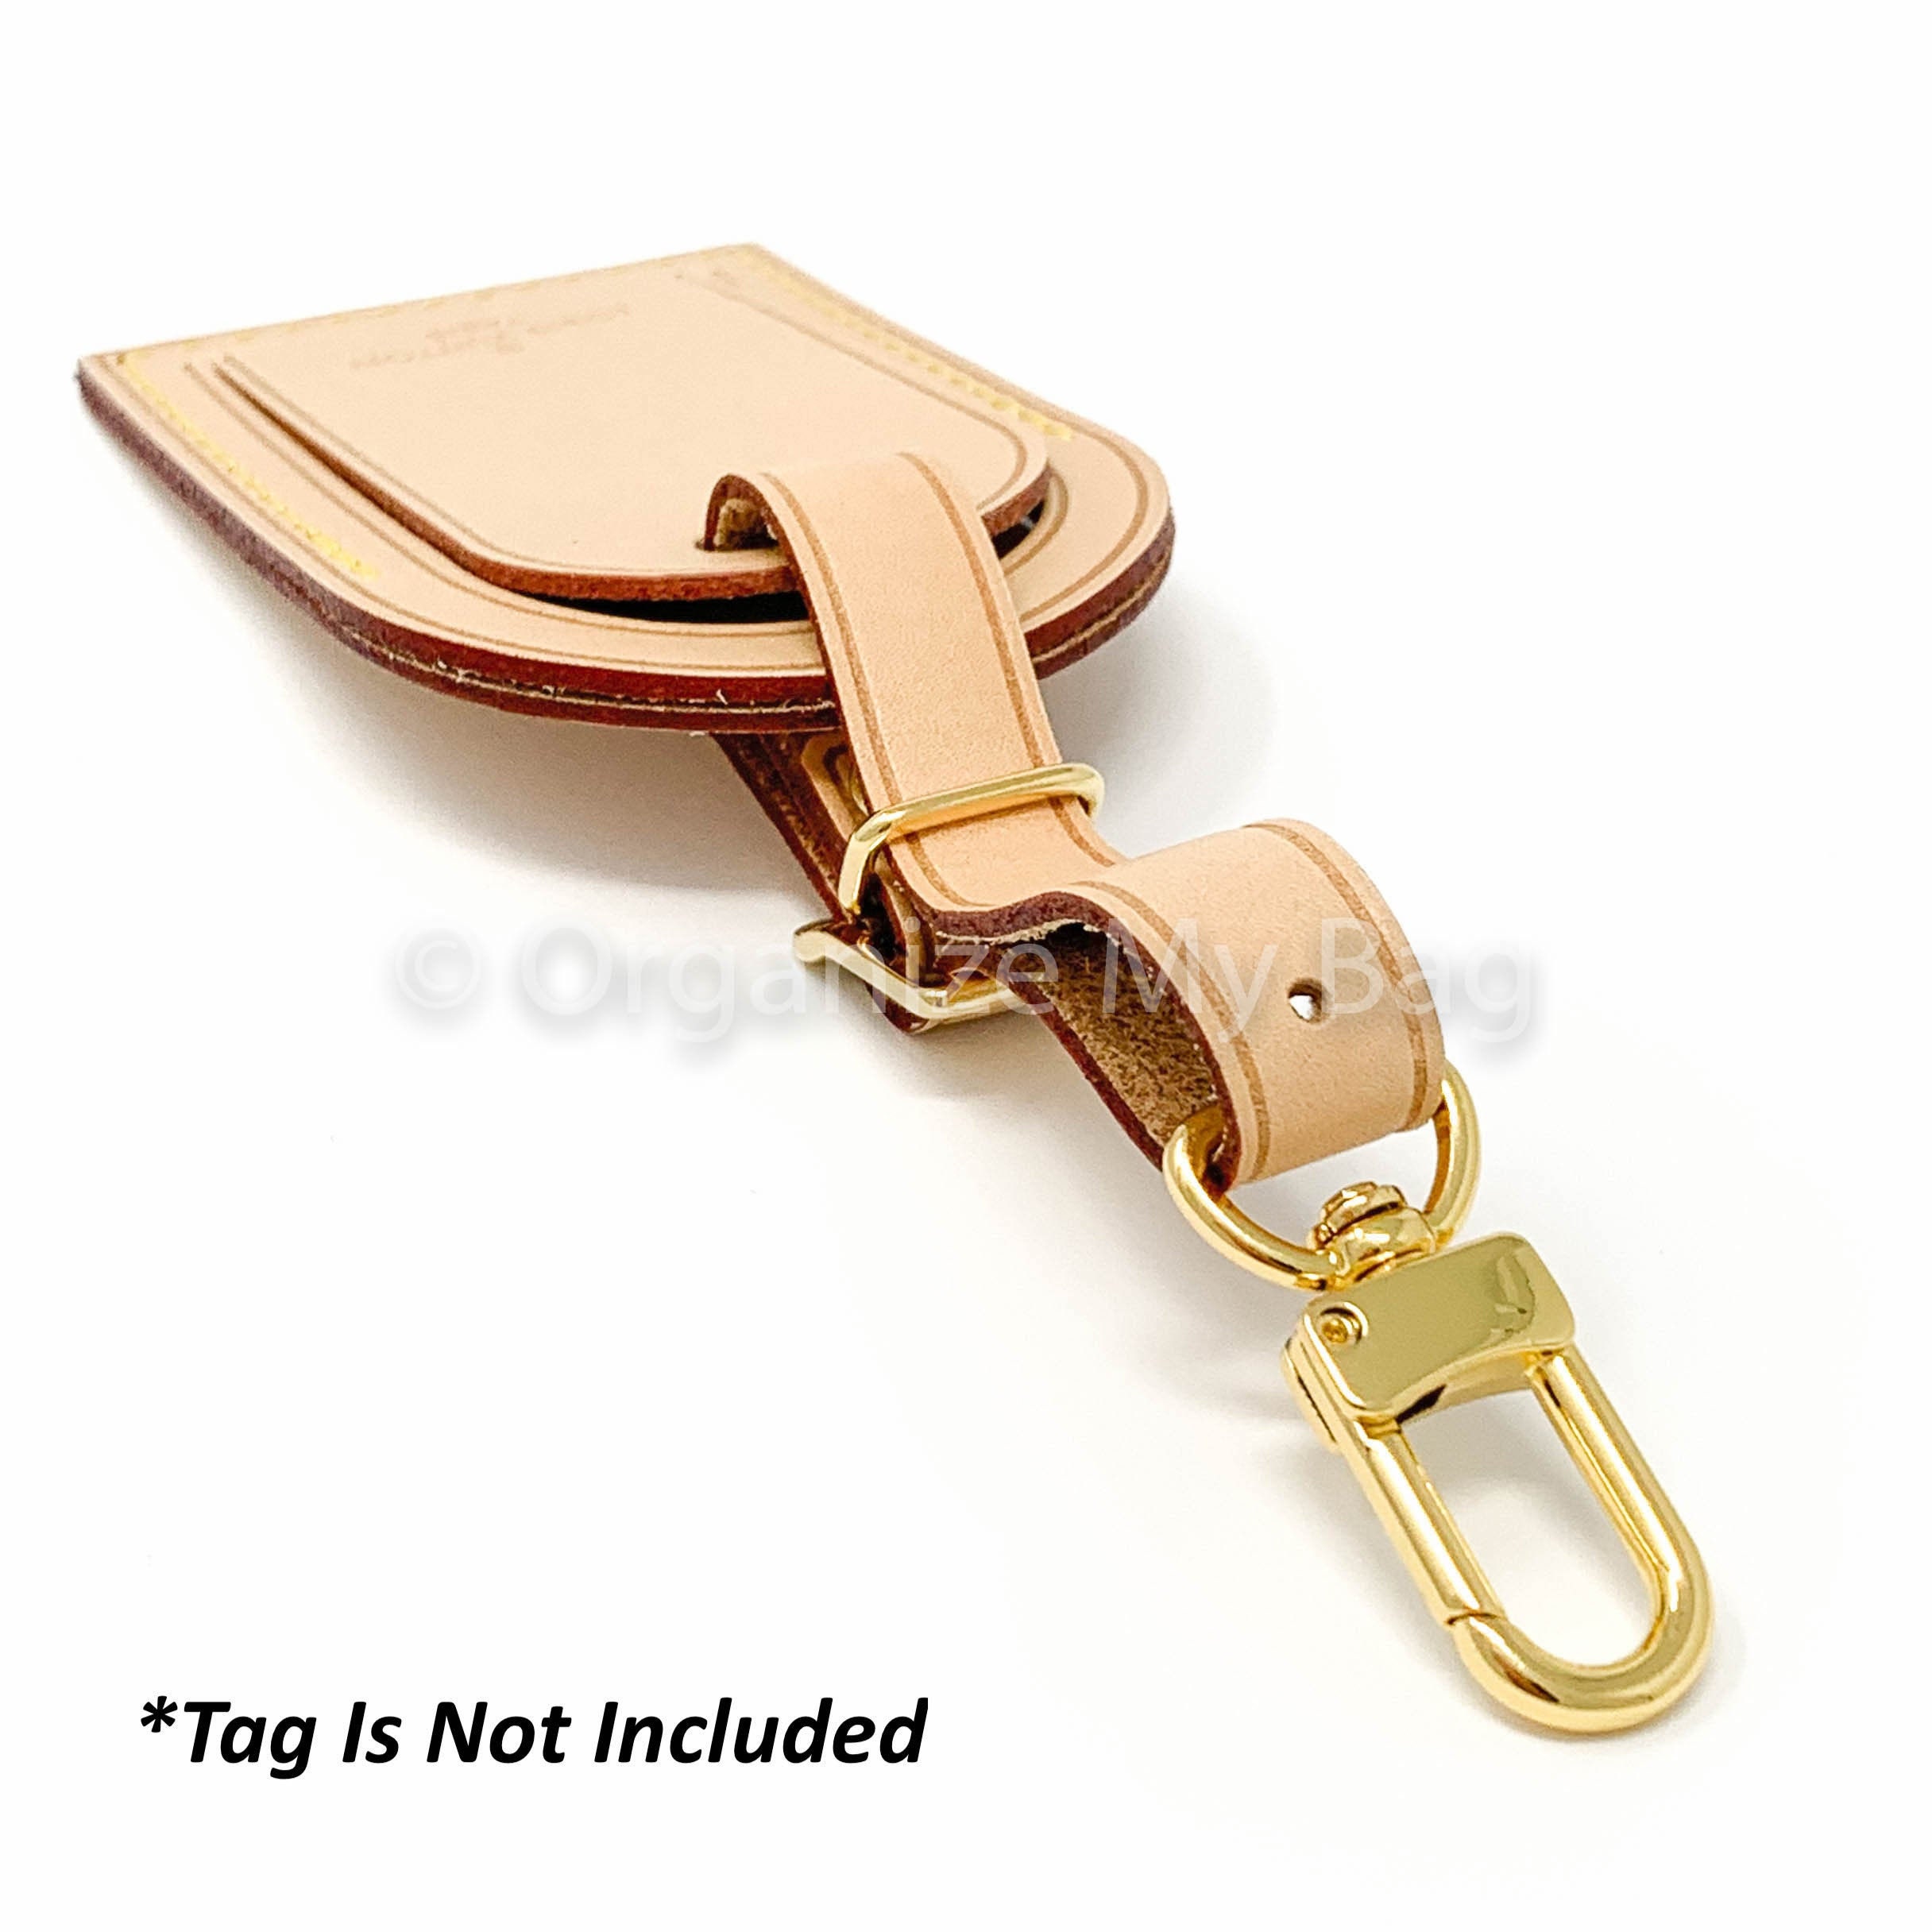 New in: Personalized luggage tag from Louis Vuitton – Buy the goddamn bag